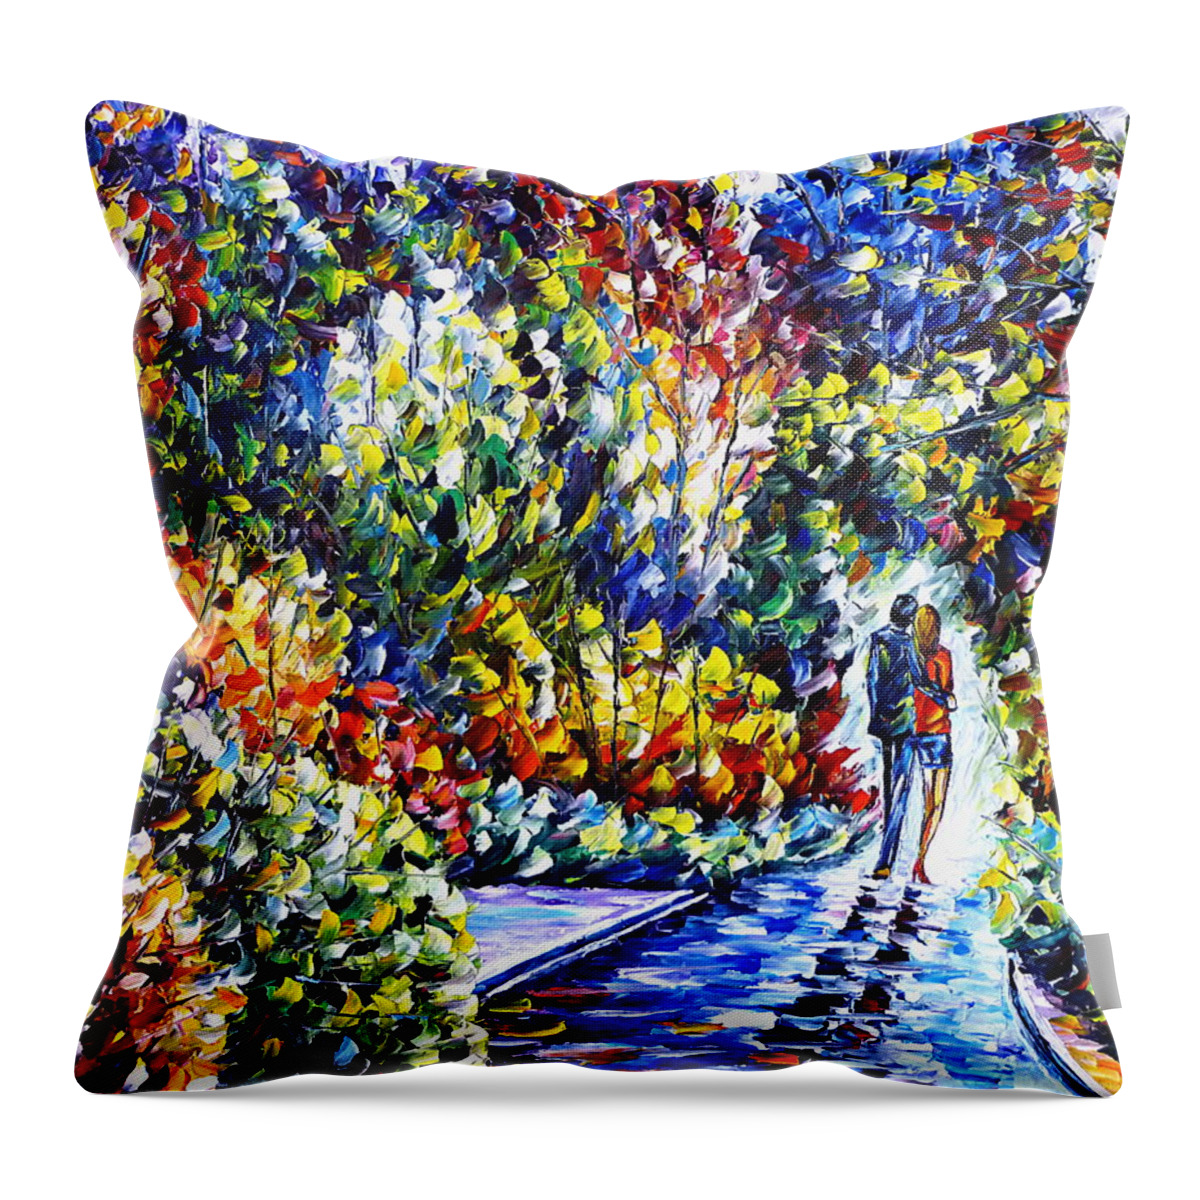 Landscape Painting Throw Pillow featuring the painting Lovers In The Garden by Mirek Kuzniar